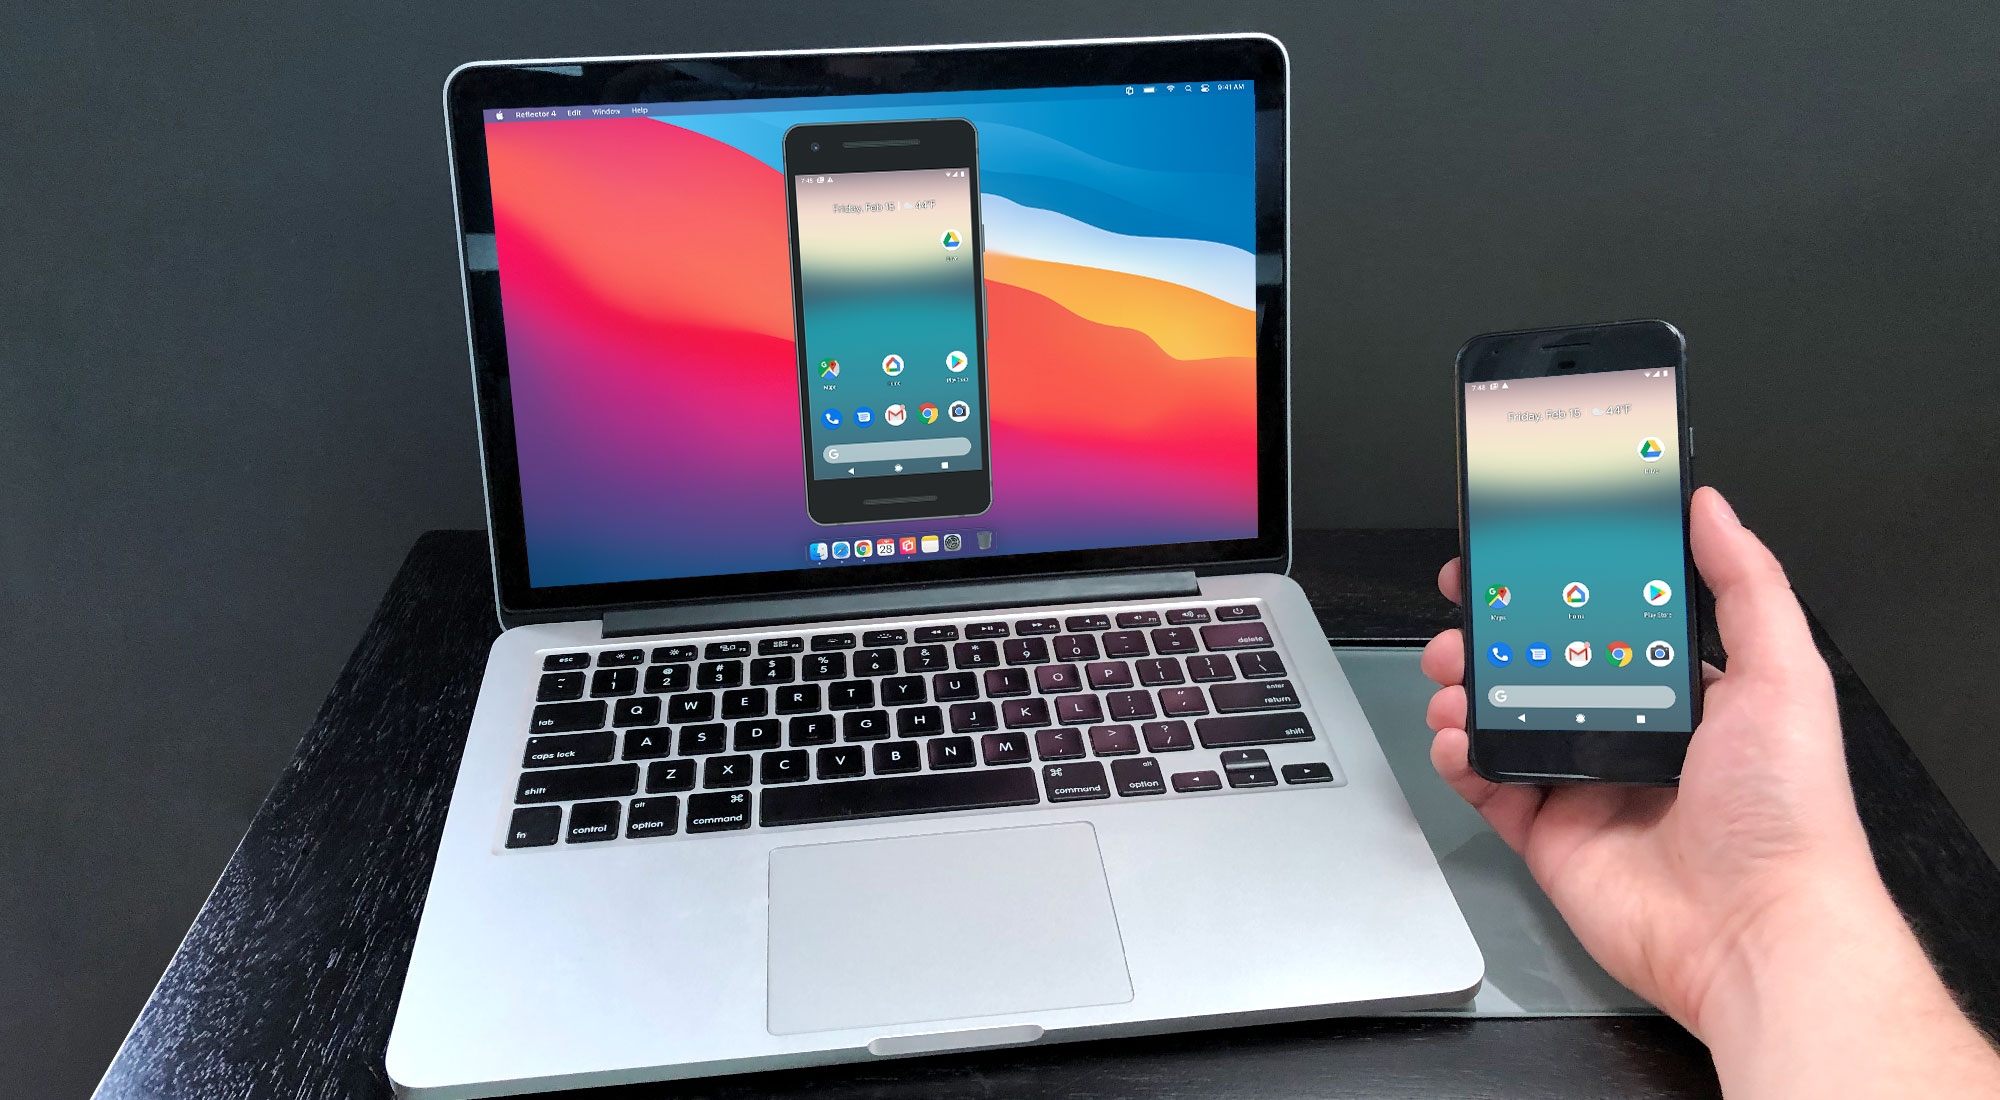 Screen Mirror Your Android Phone, How To Mirror Iphone Mac Laptop Without Wifi